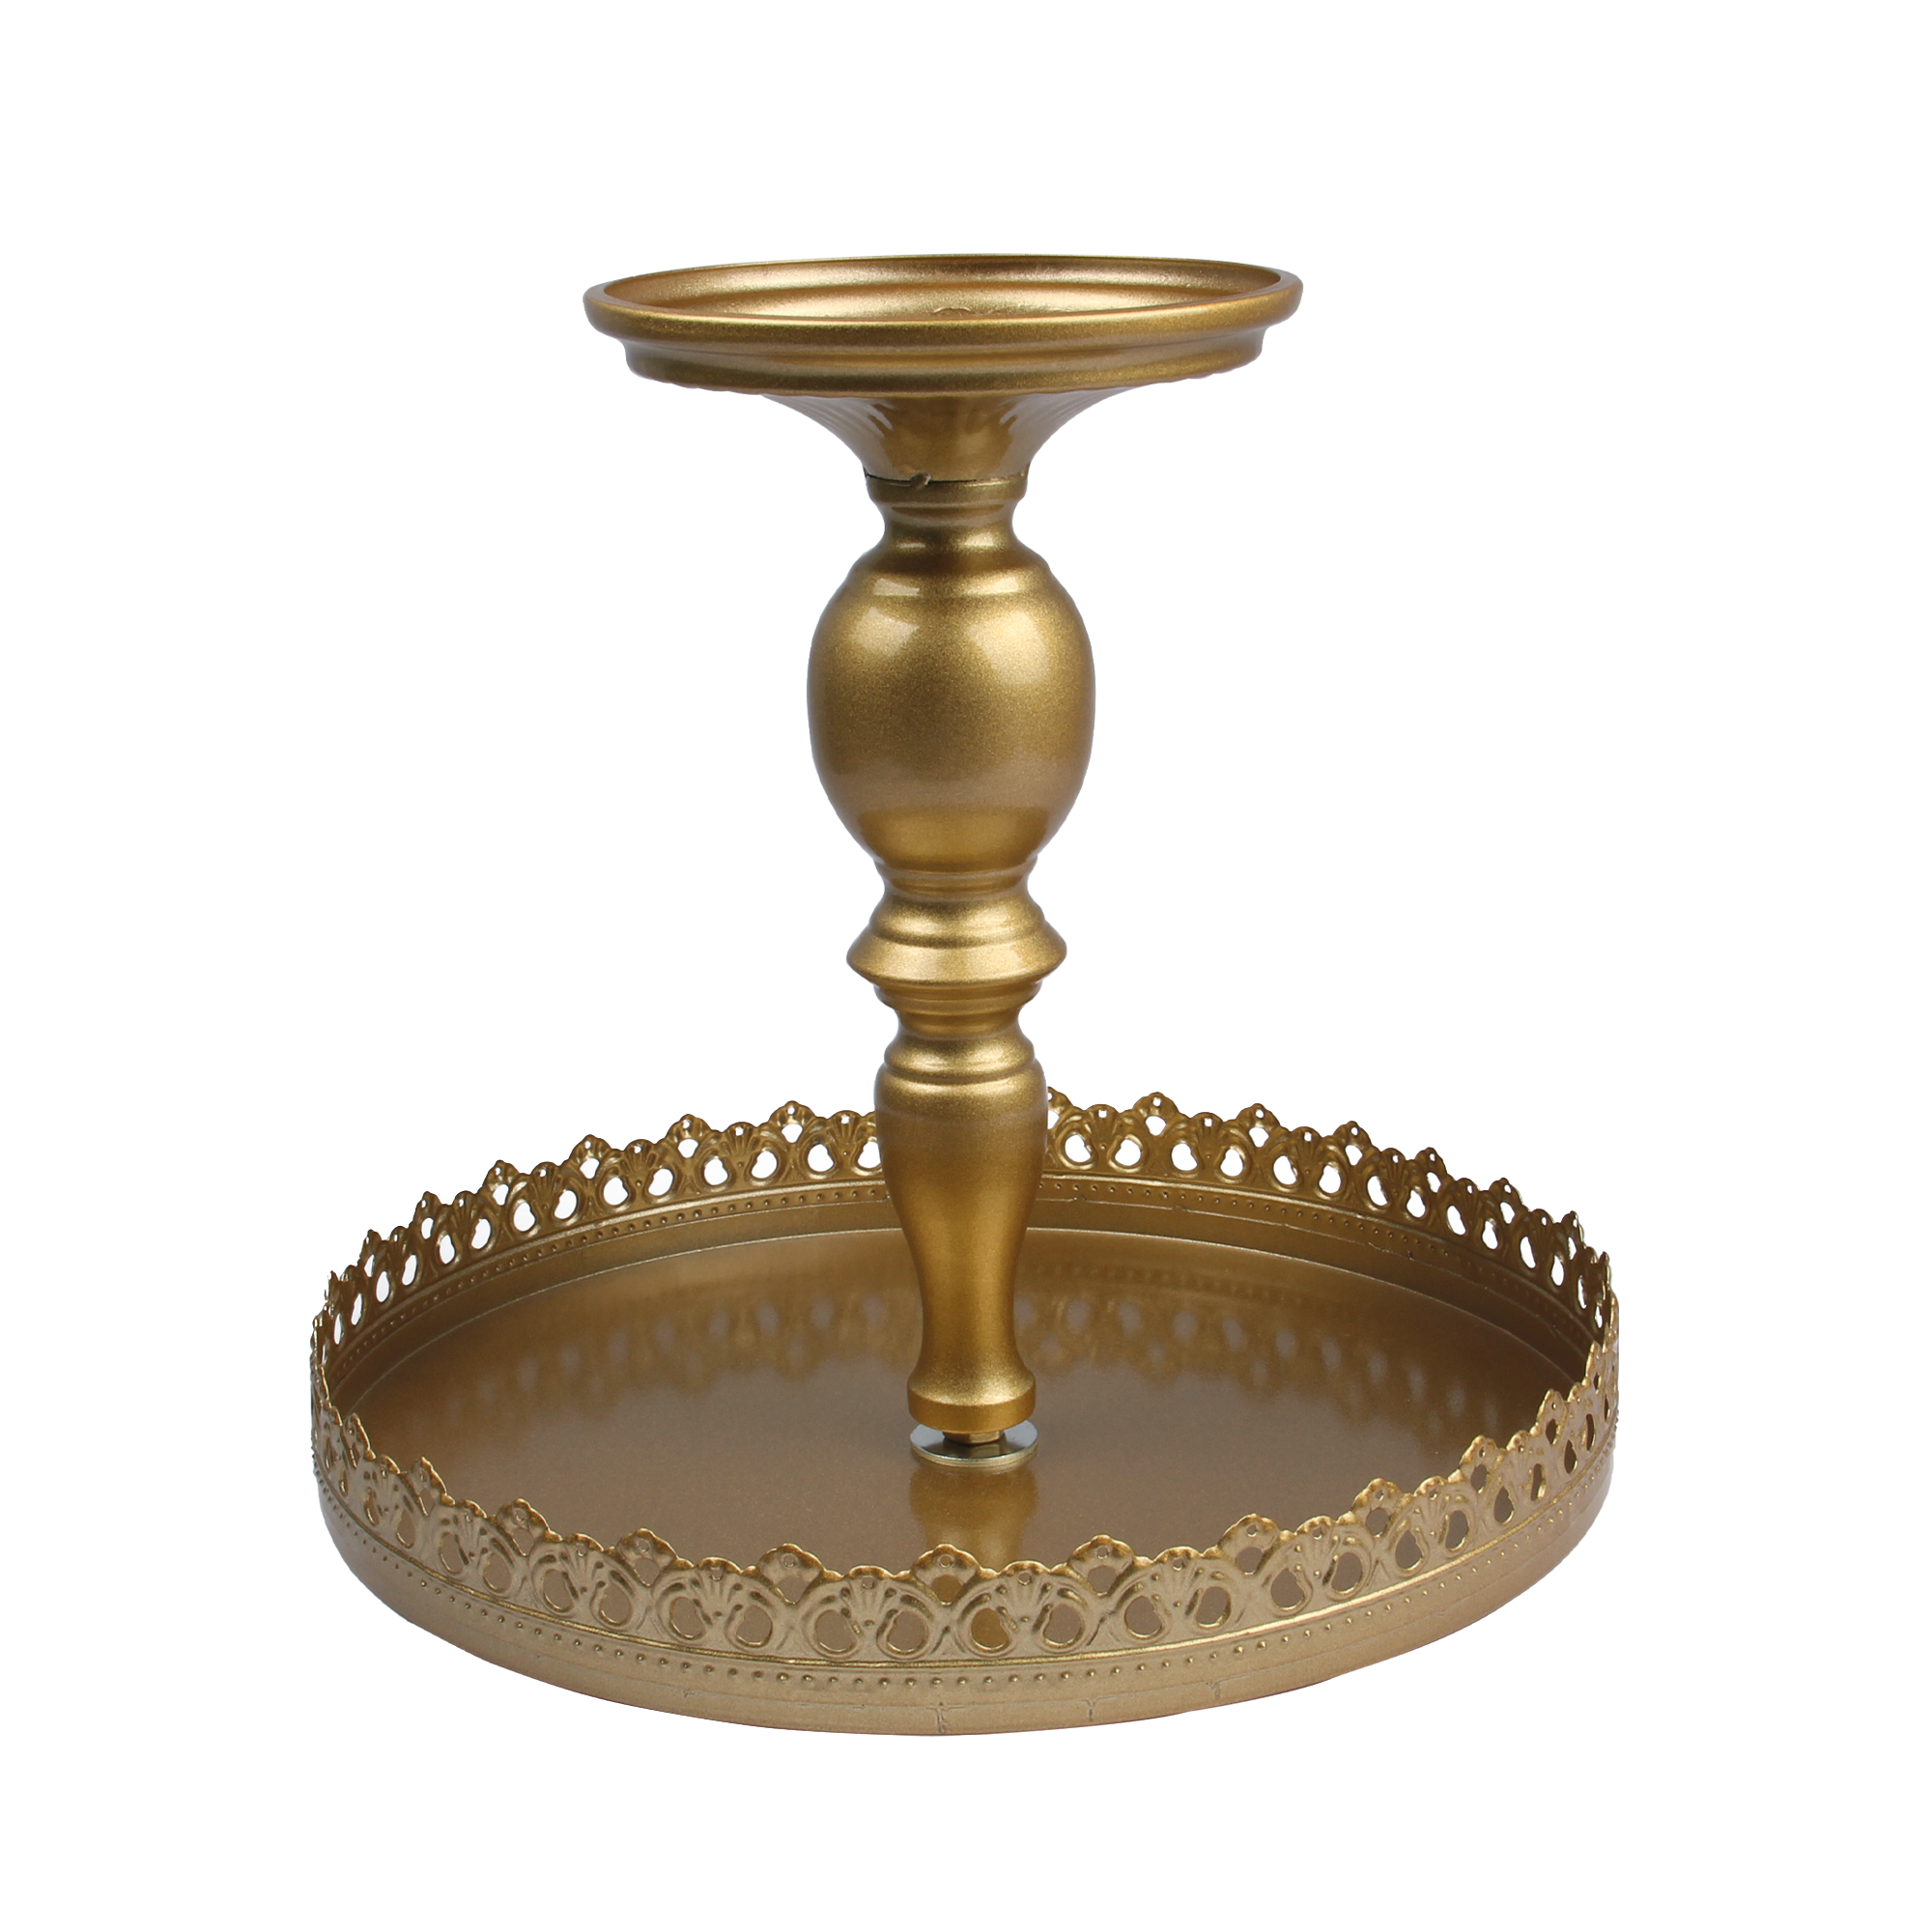 HB0989B 12"Metal Cake/Cupcake Stand in gold color